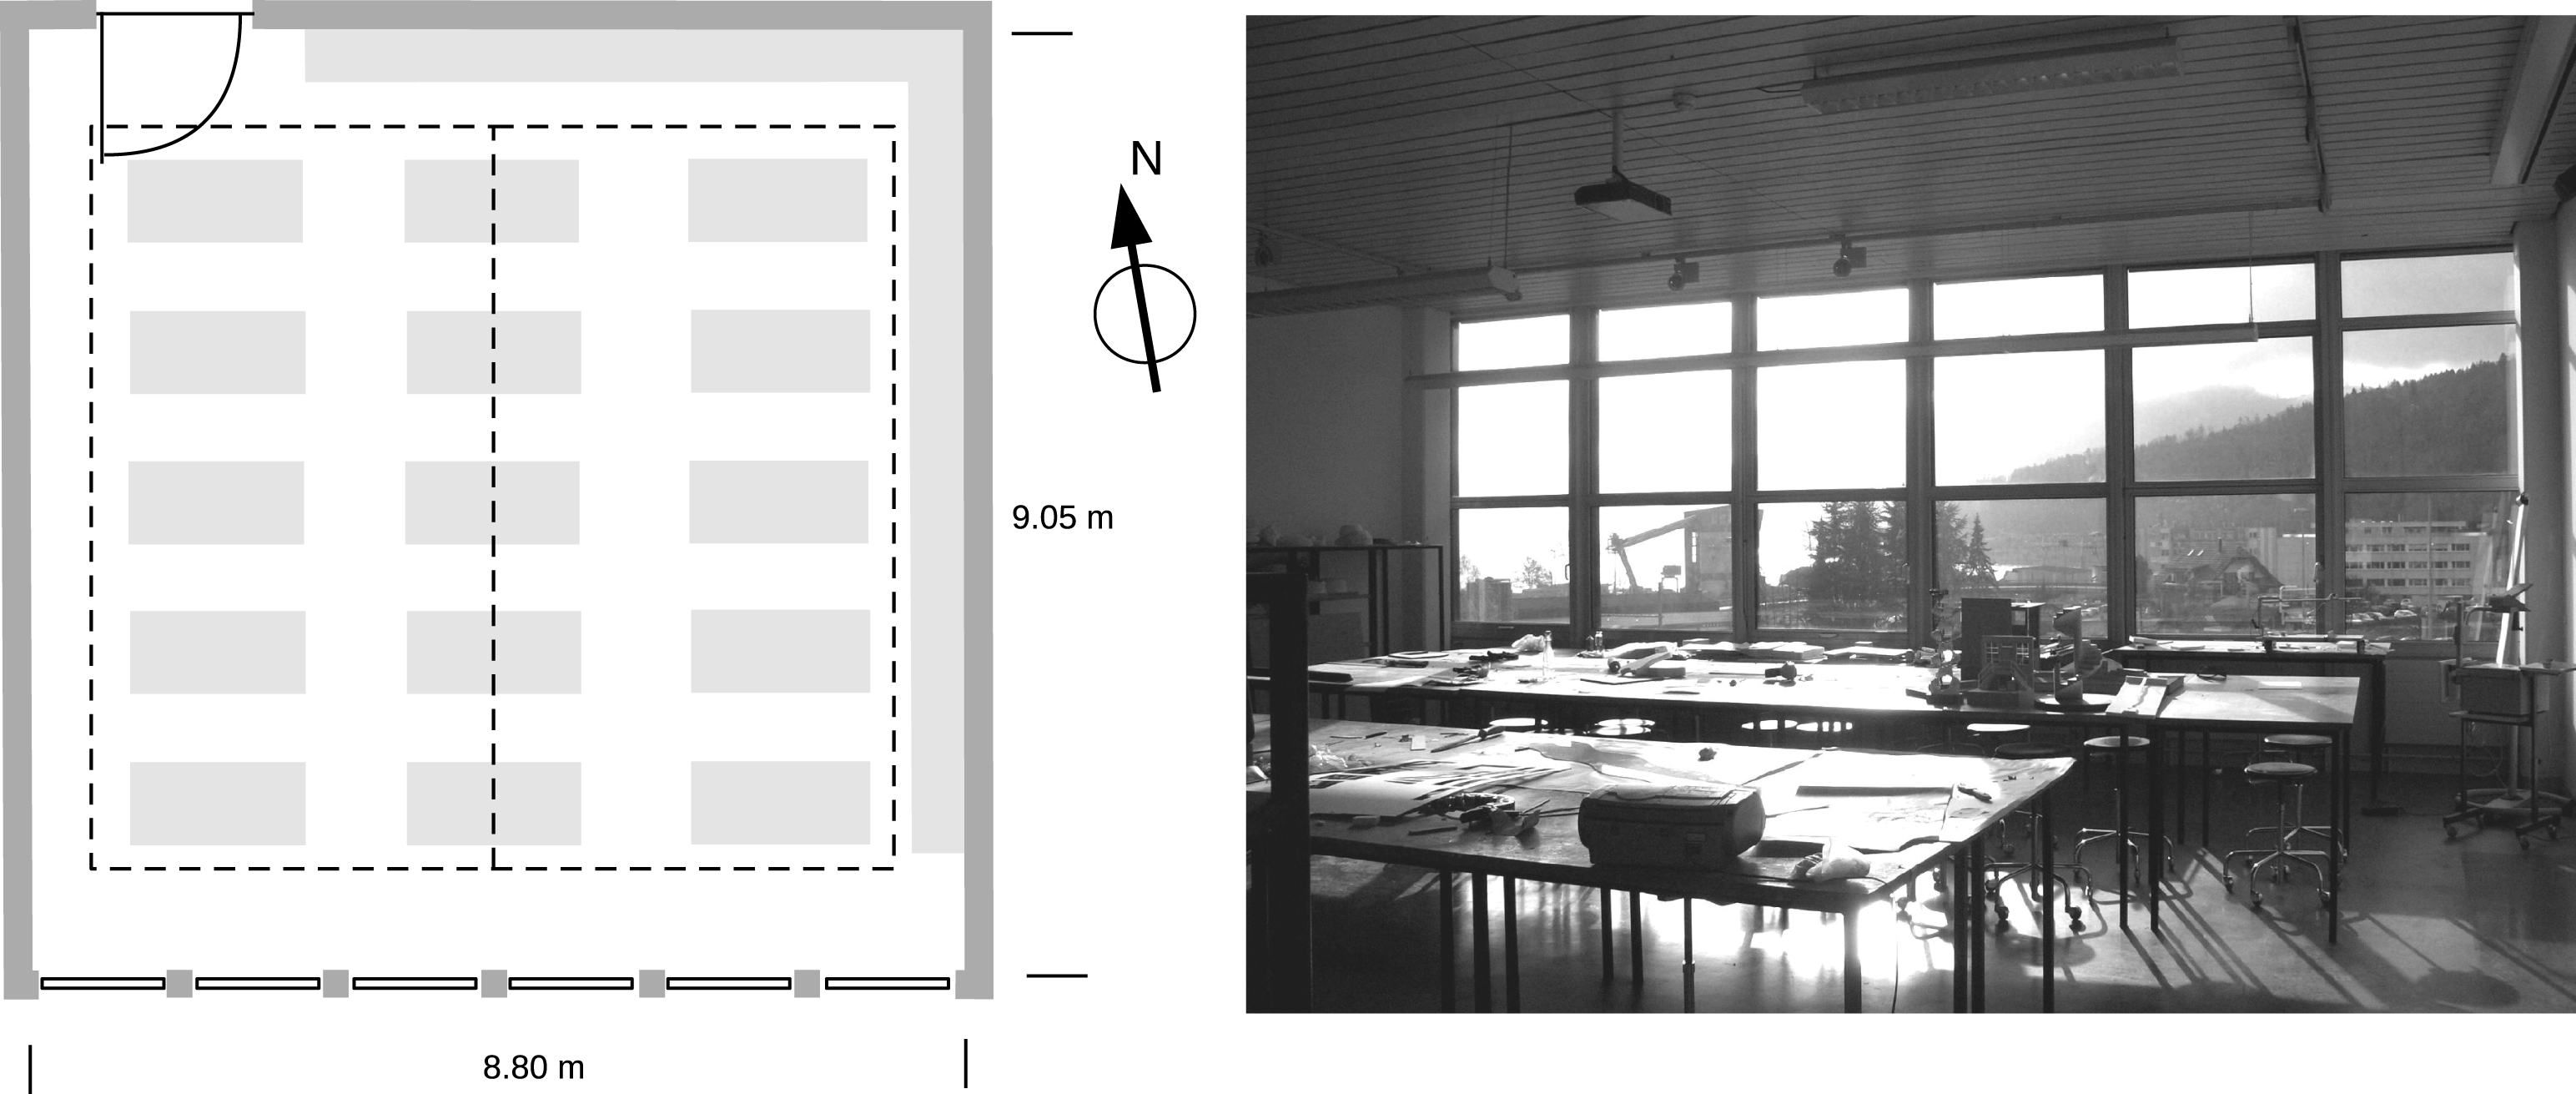 Plan view of the studio classroom used in our case study. The light grey fields indicate the furniture and the dashed line marks the sensor plane for the illuminance calculation. On the right, a photo of the room is shown, taken from the entrance facing the window facade.